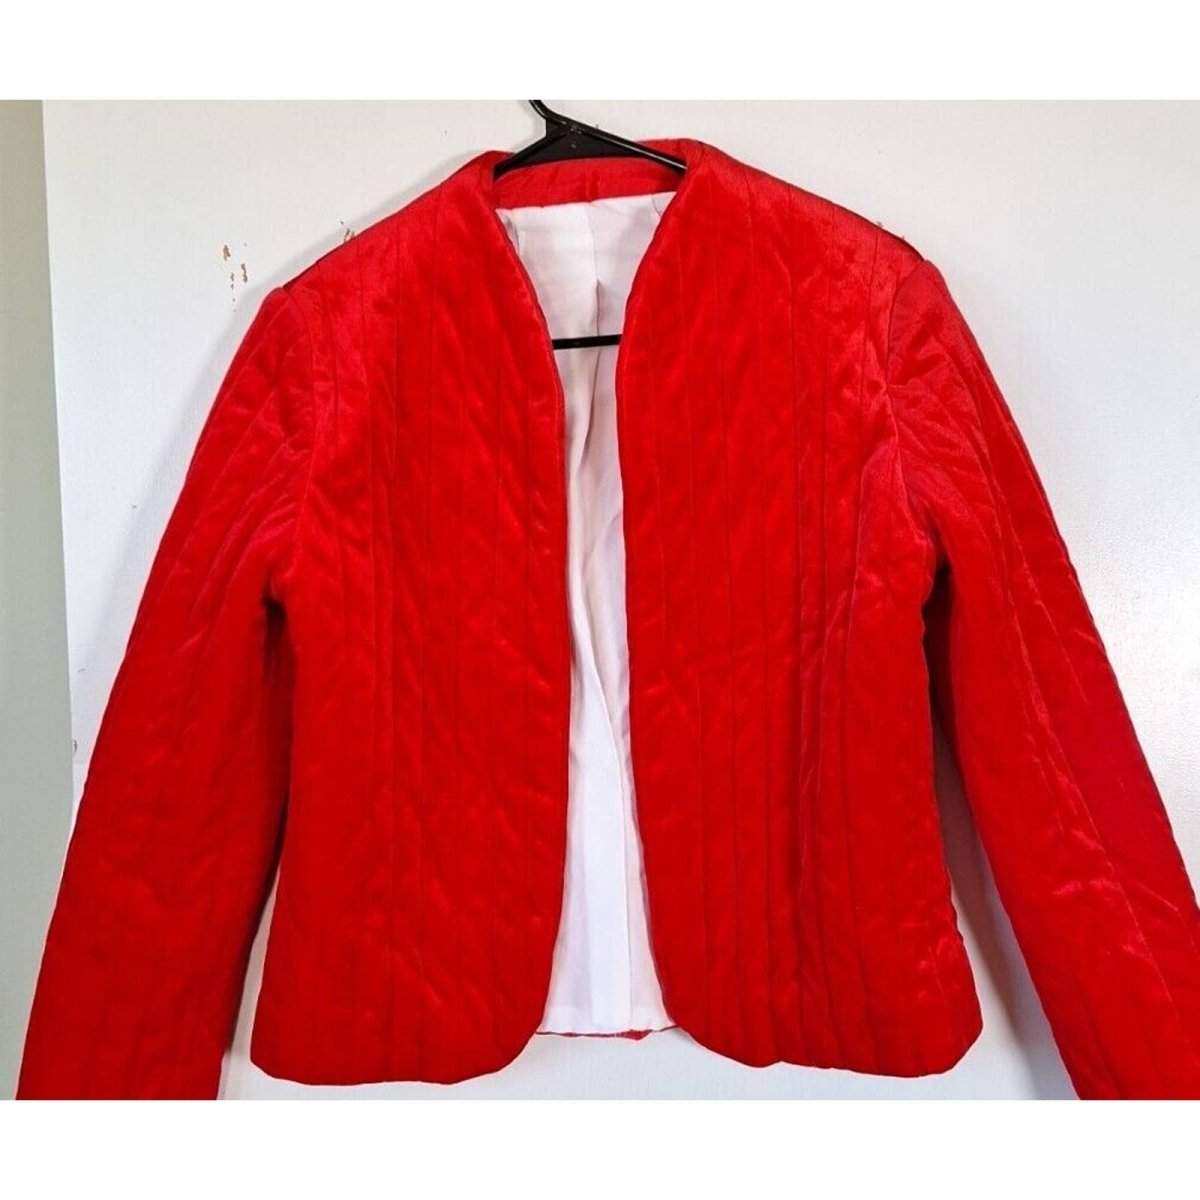 Vintage Red Quilted Open Front Jacket Size Medium Chest up to 40" - themallvintage The Mall Vintage